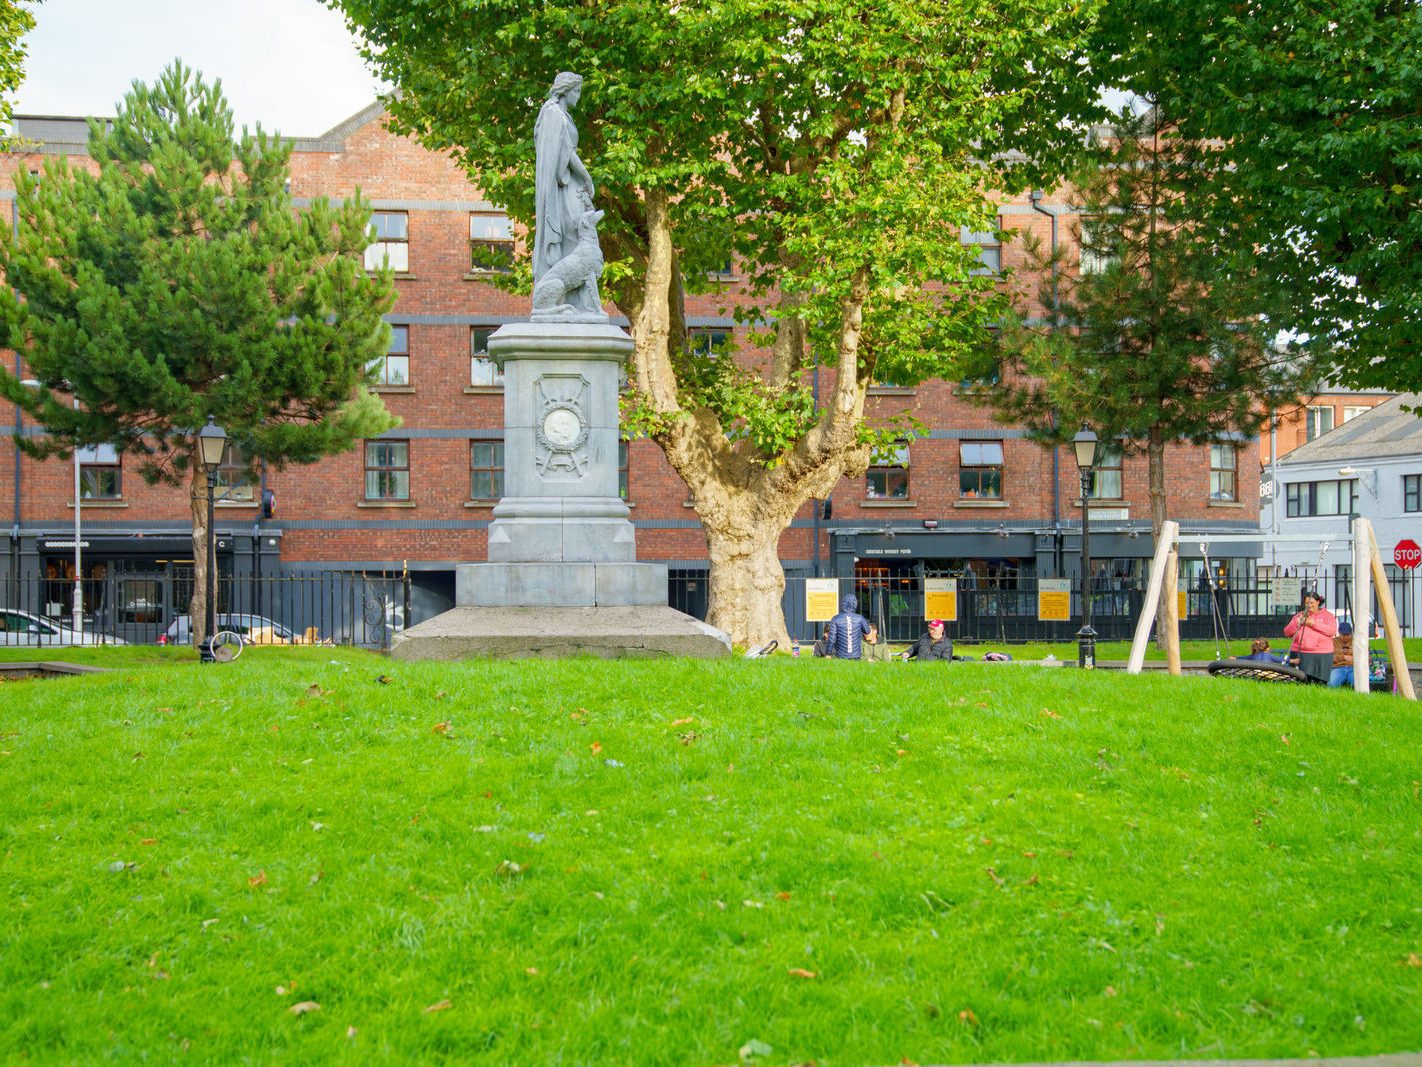 THE ÉIRE 1798 MEMORIAL [IS THE CENTRAL FEATURE OF SAINT MICHAN'S PARK IN DUBLIN] 003